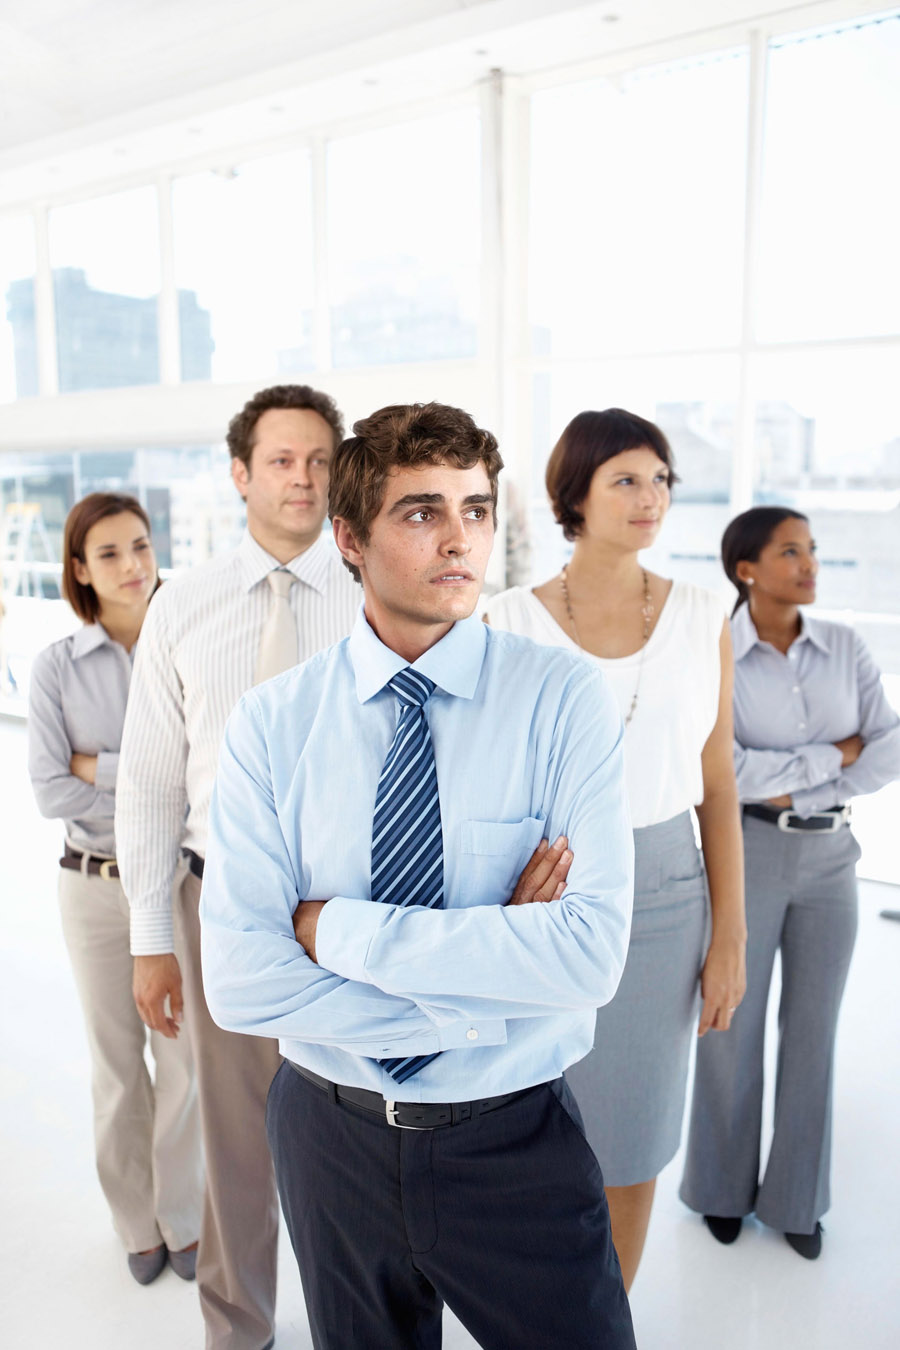 Manager with business group standing in office